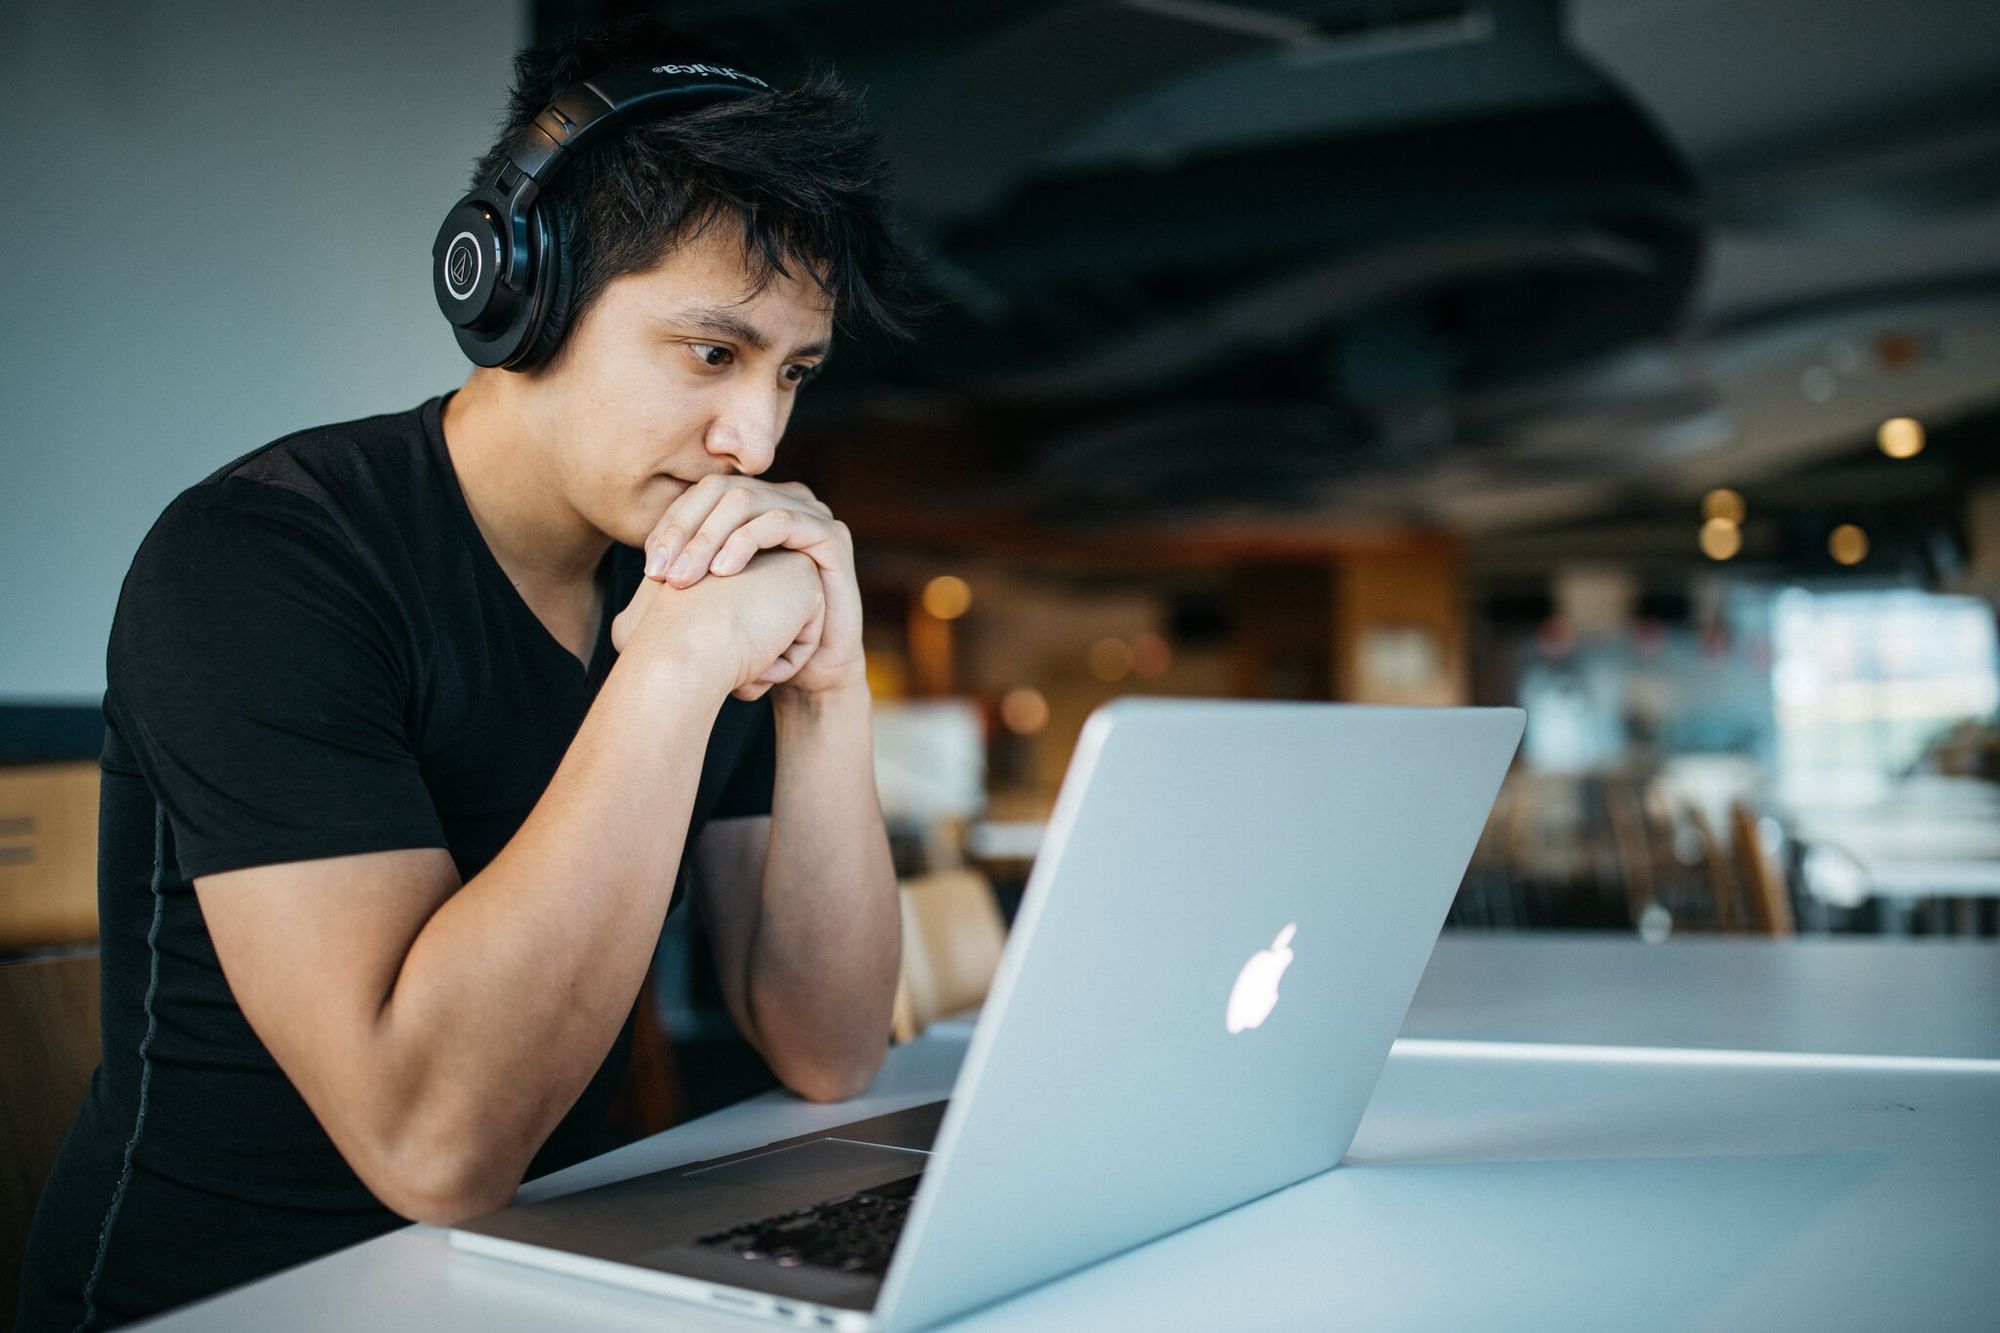 A man wearing headphones and checking a laptop screen